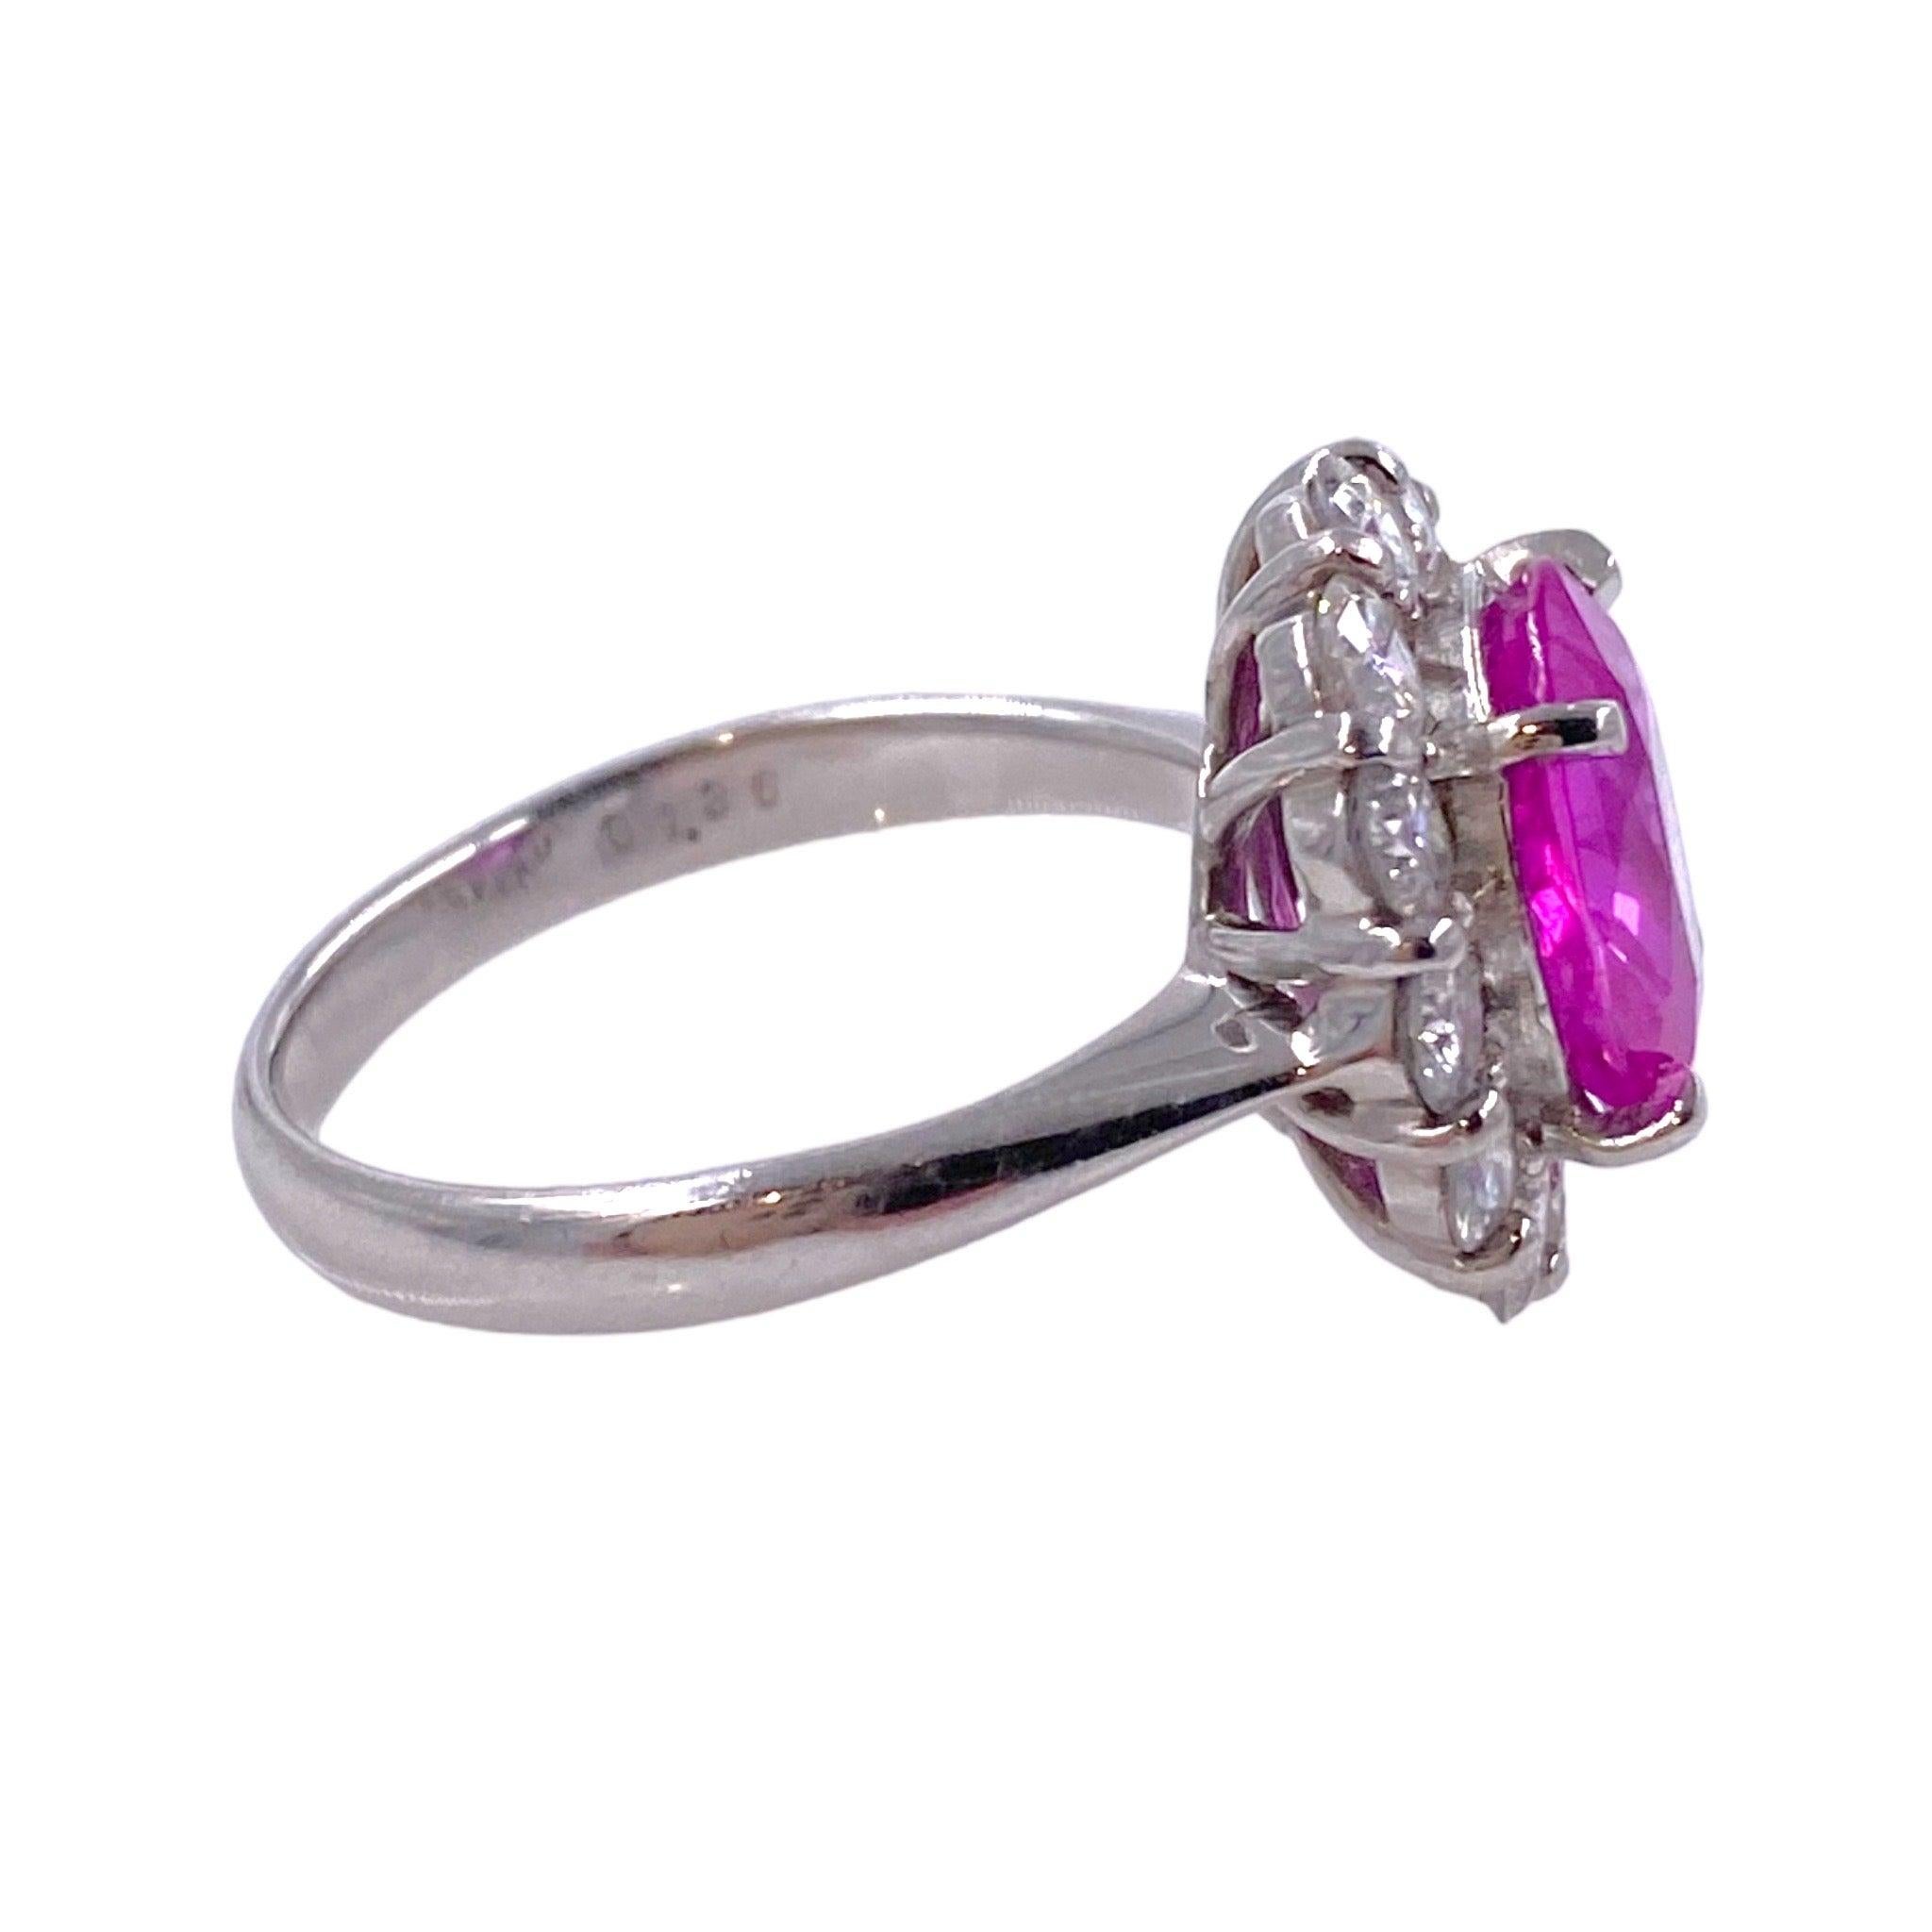 GRS Certified Burma Pink Sapphire & Diamond Platinum Ring In Excellent Condition For Sale In Henderson, NV